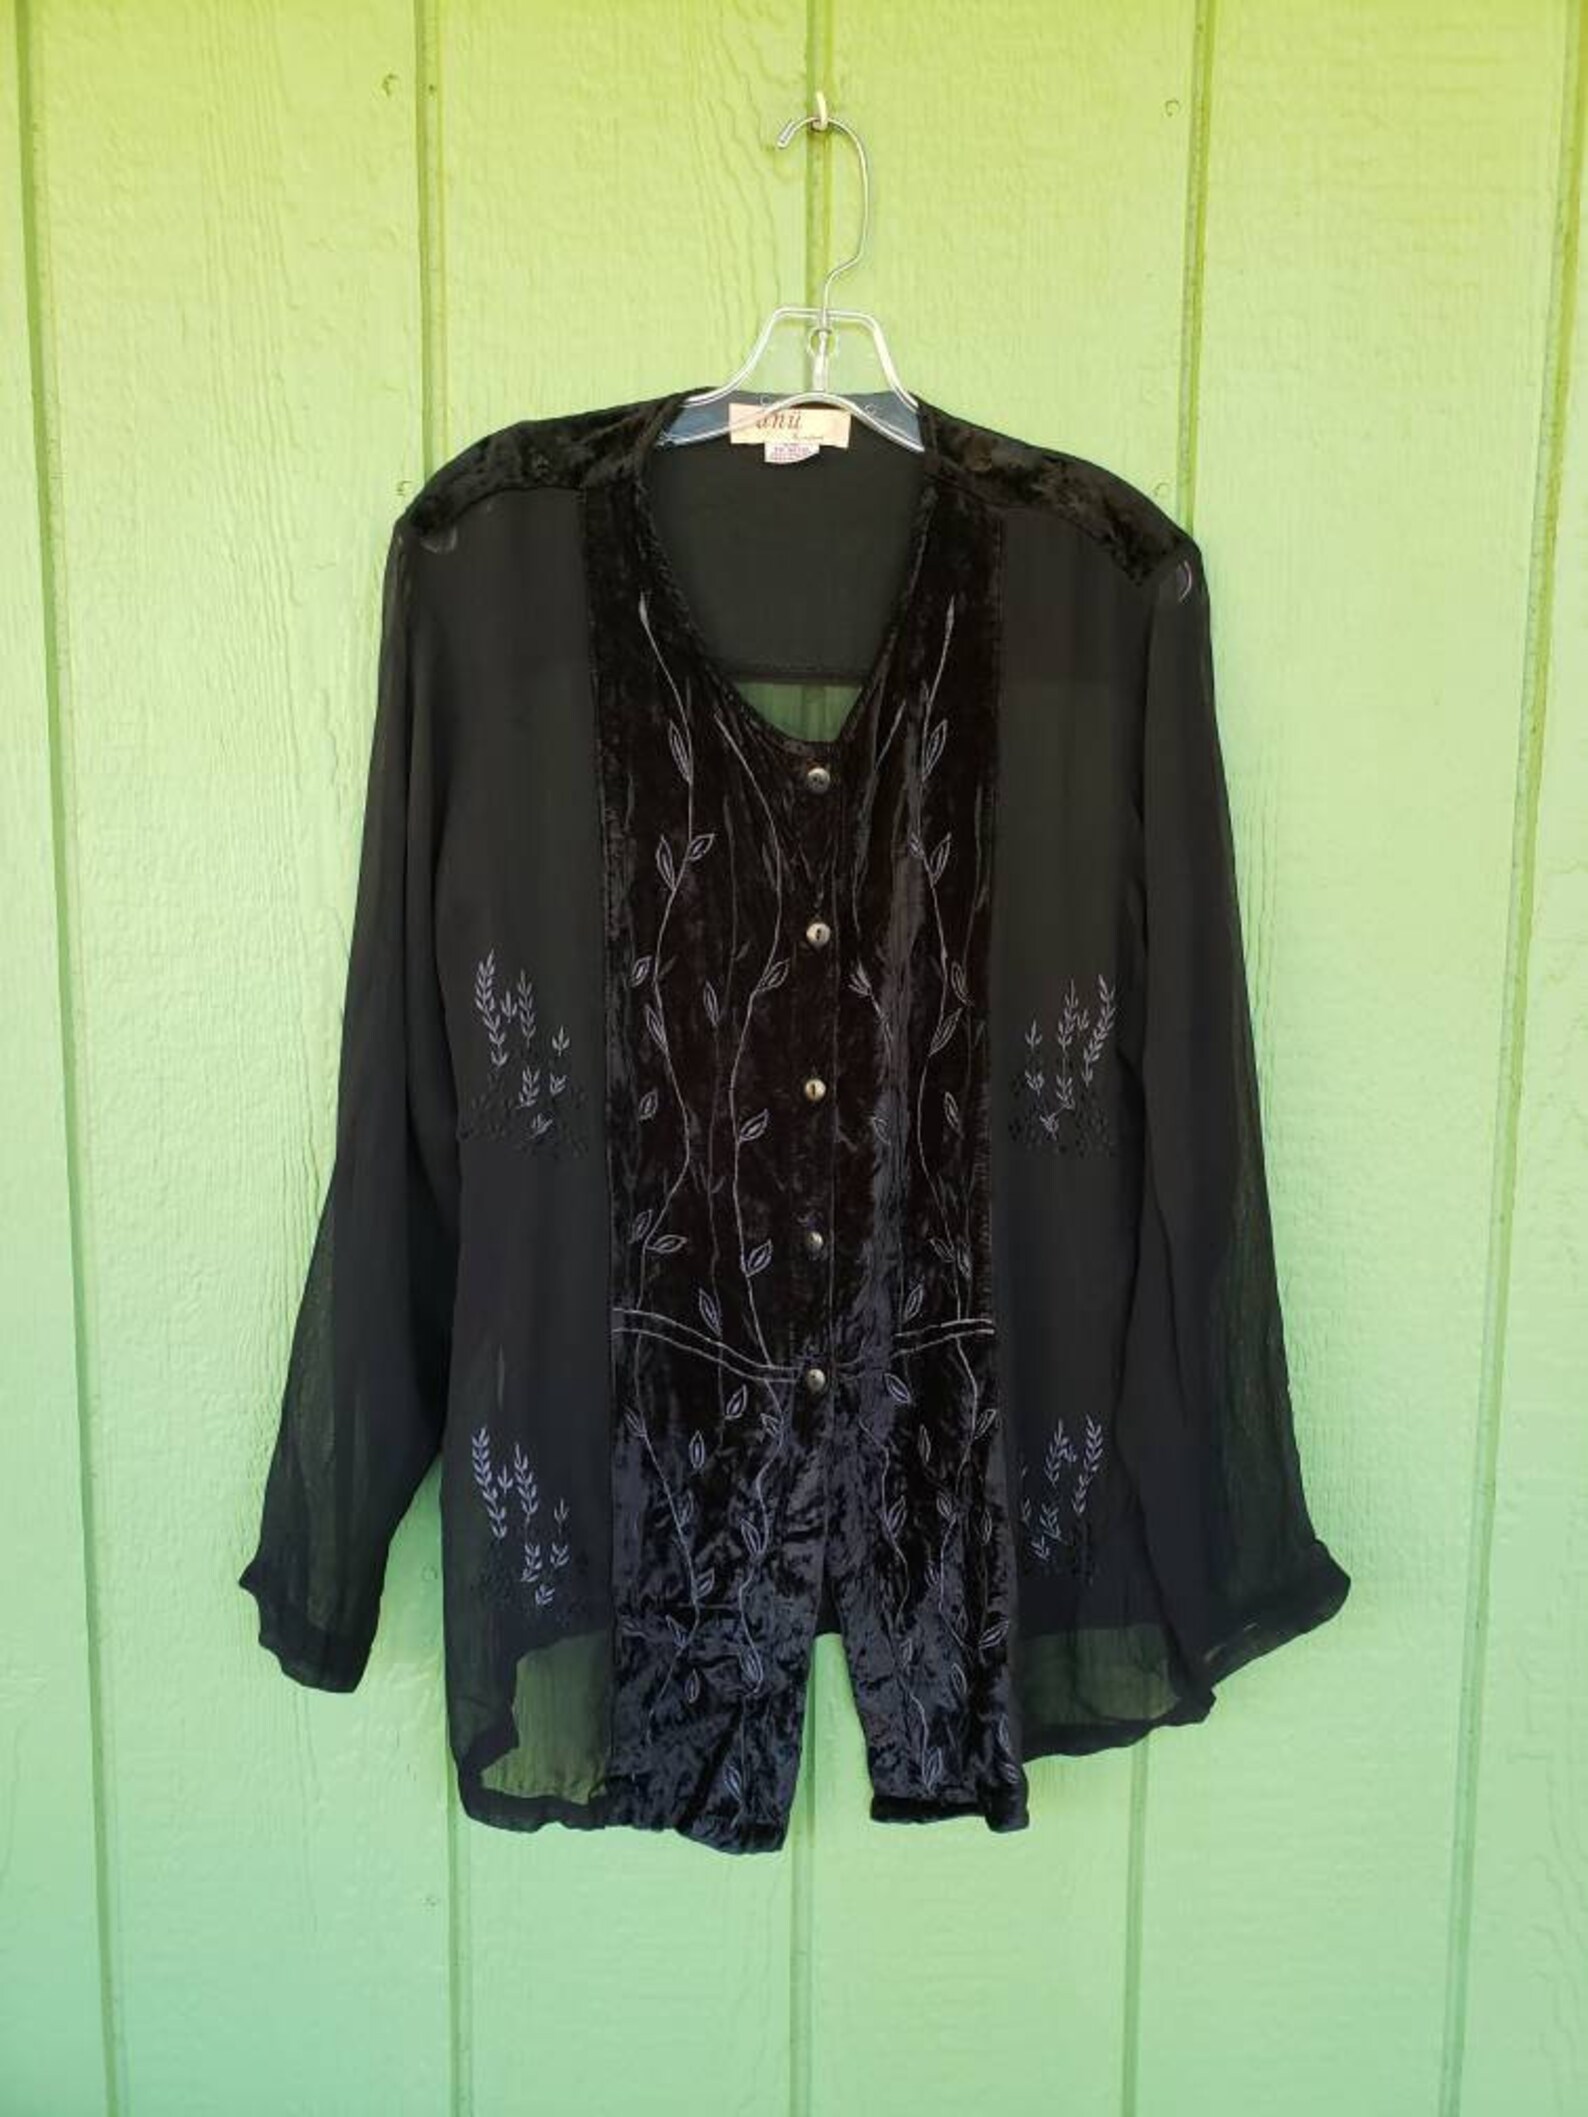 Vintage Sheer and Velvet Tunic Blouse by Anii for Natural | Etsy